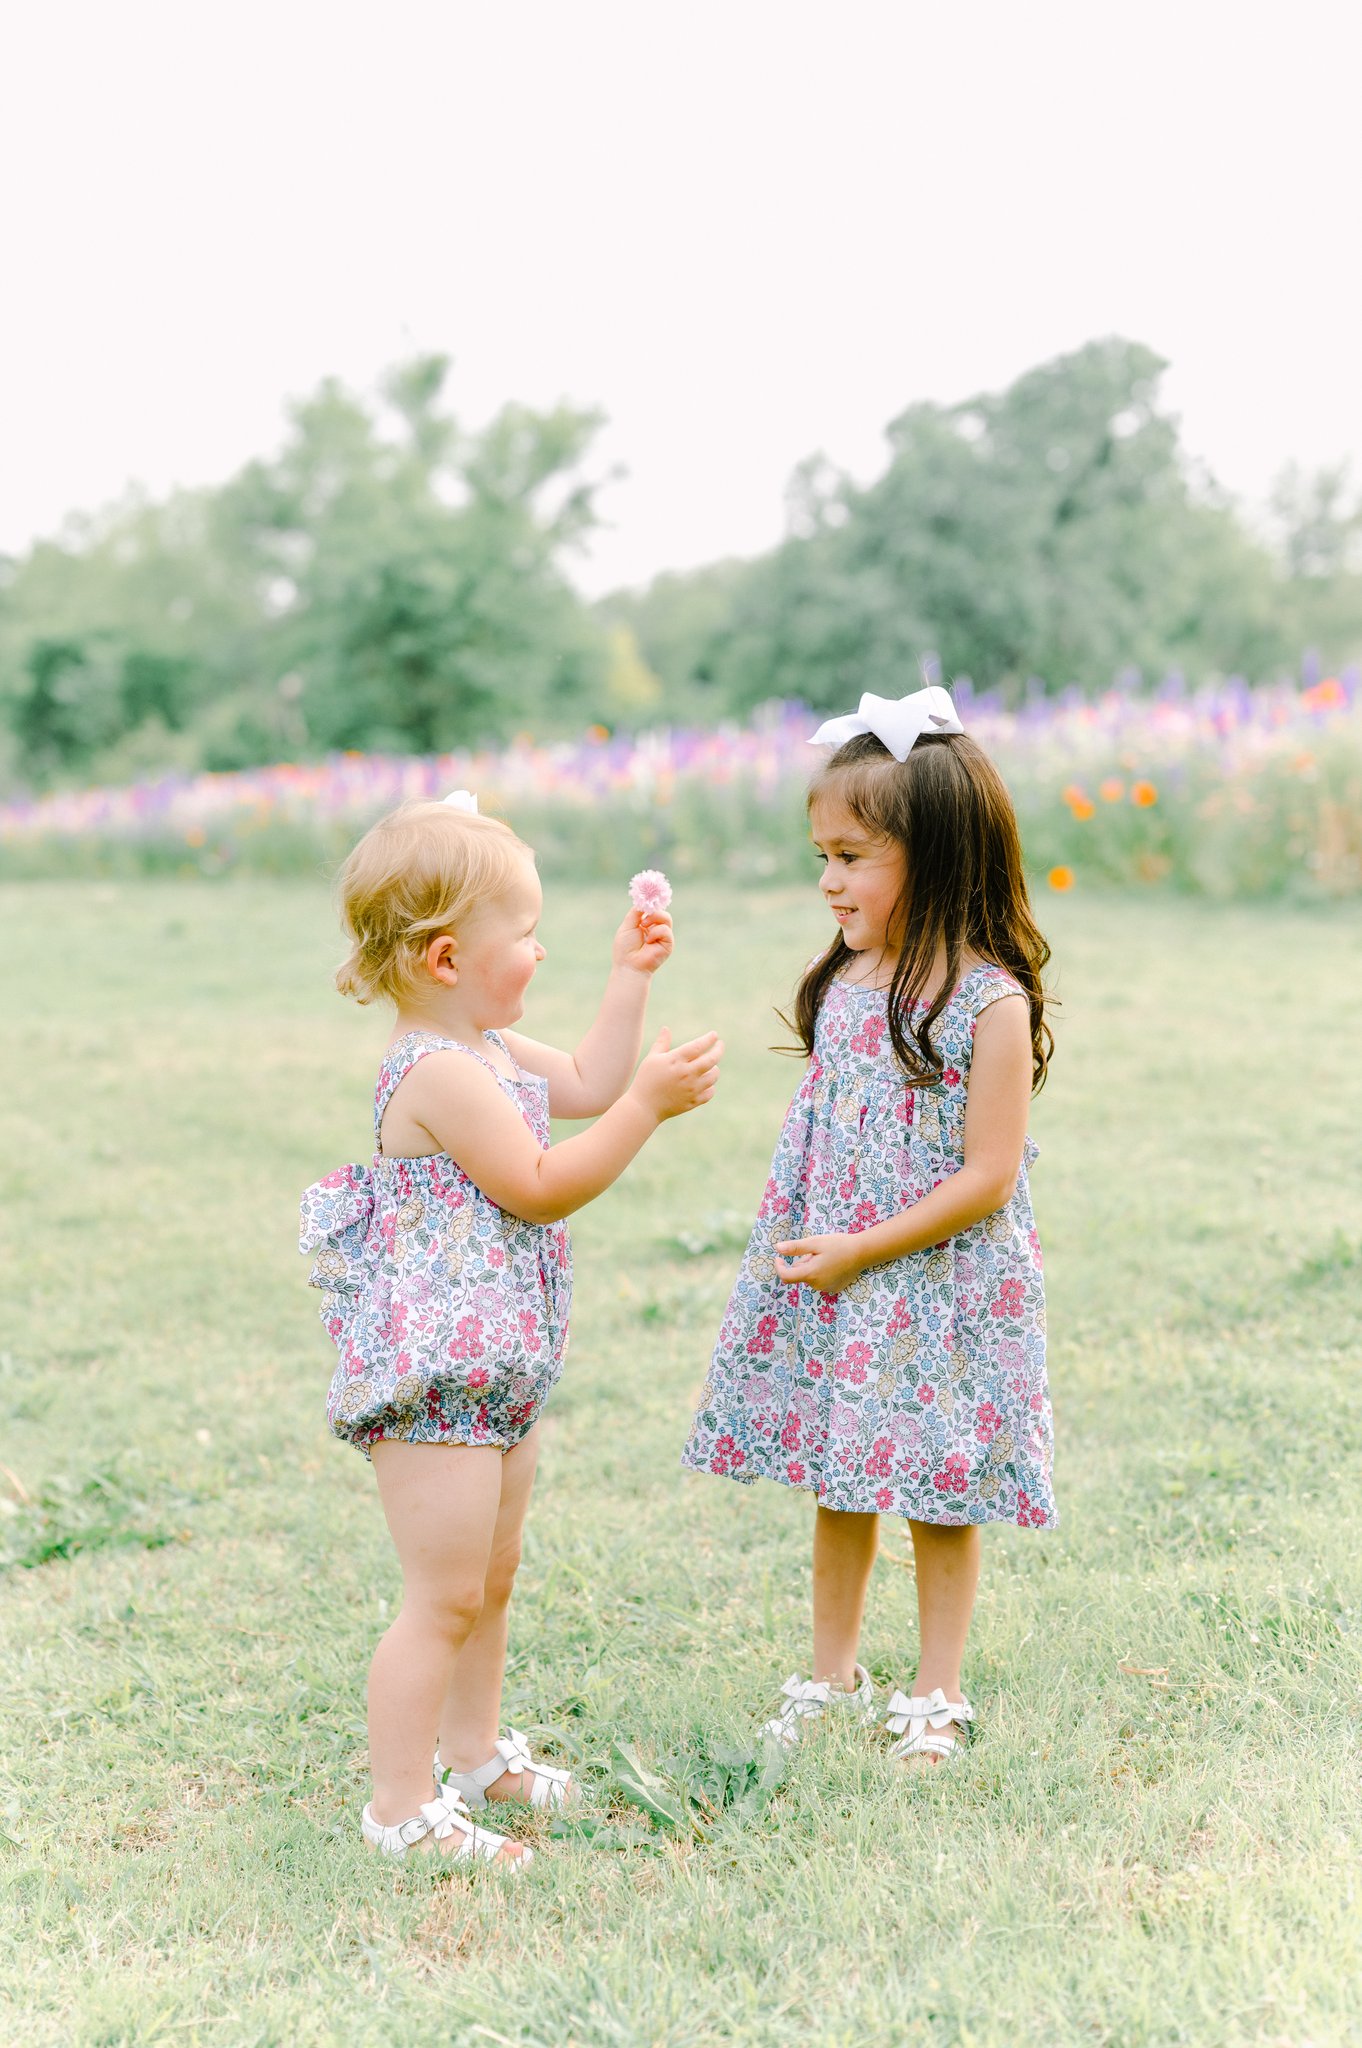 Two young girls playing in front of a field of flowers.